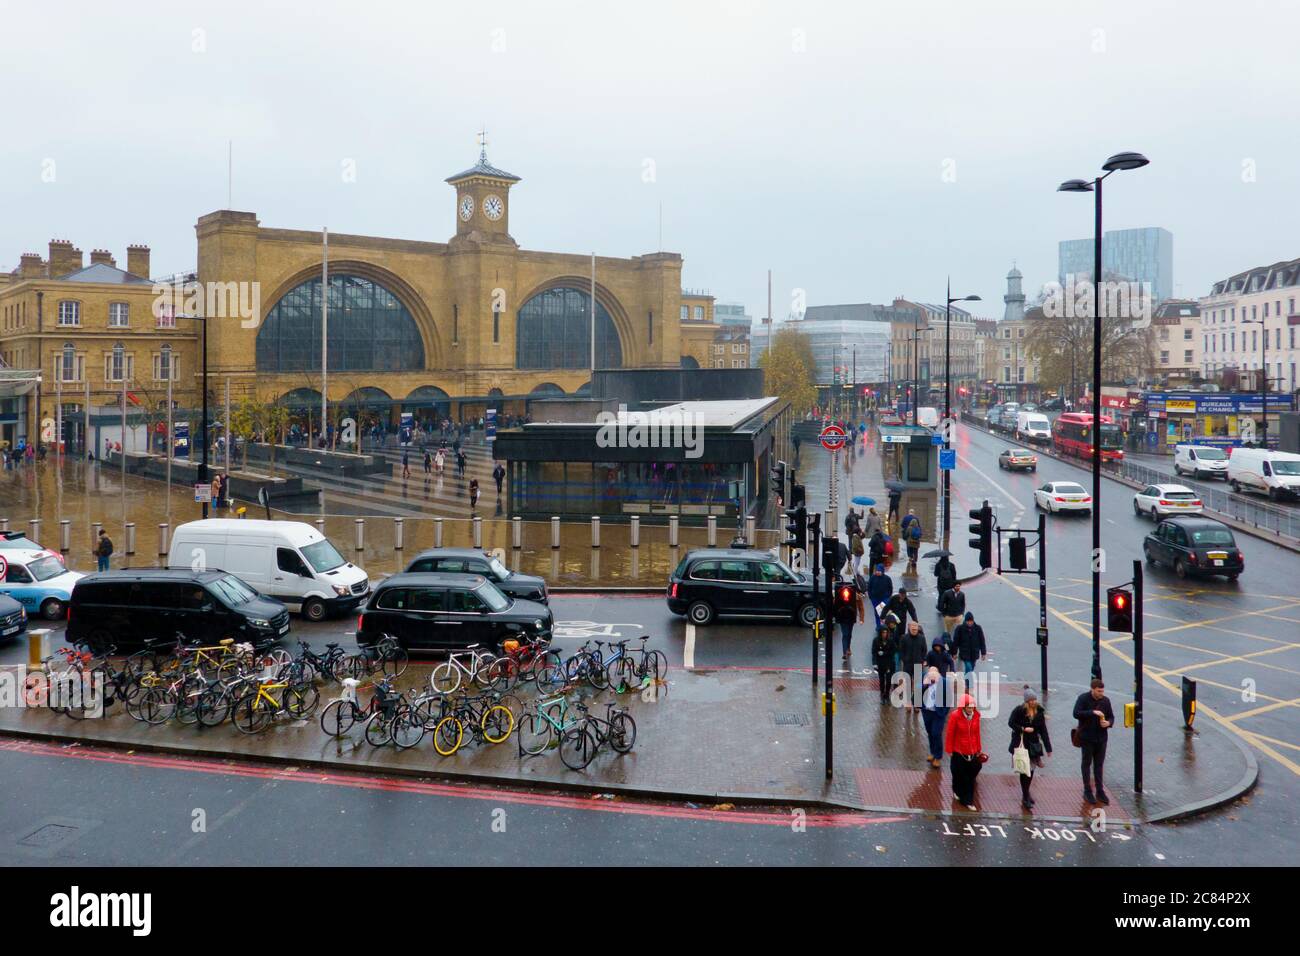 Kings Cross Station, Euston Road, Rainy Day.London, Angleterre Banque D'Images